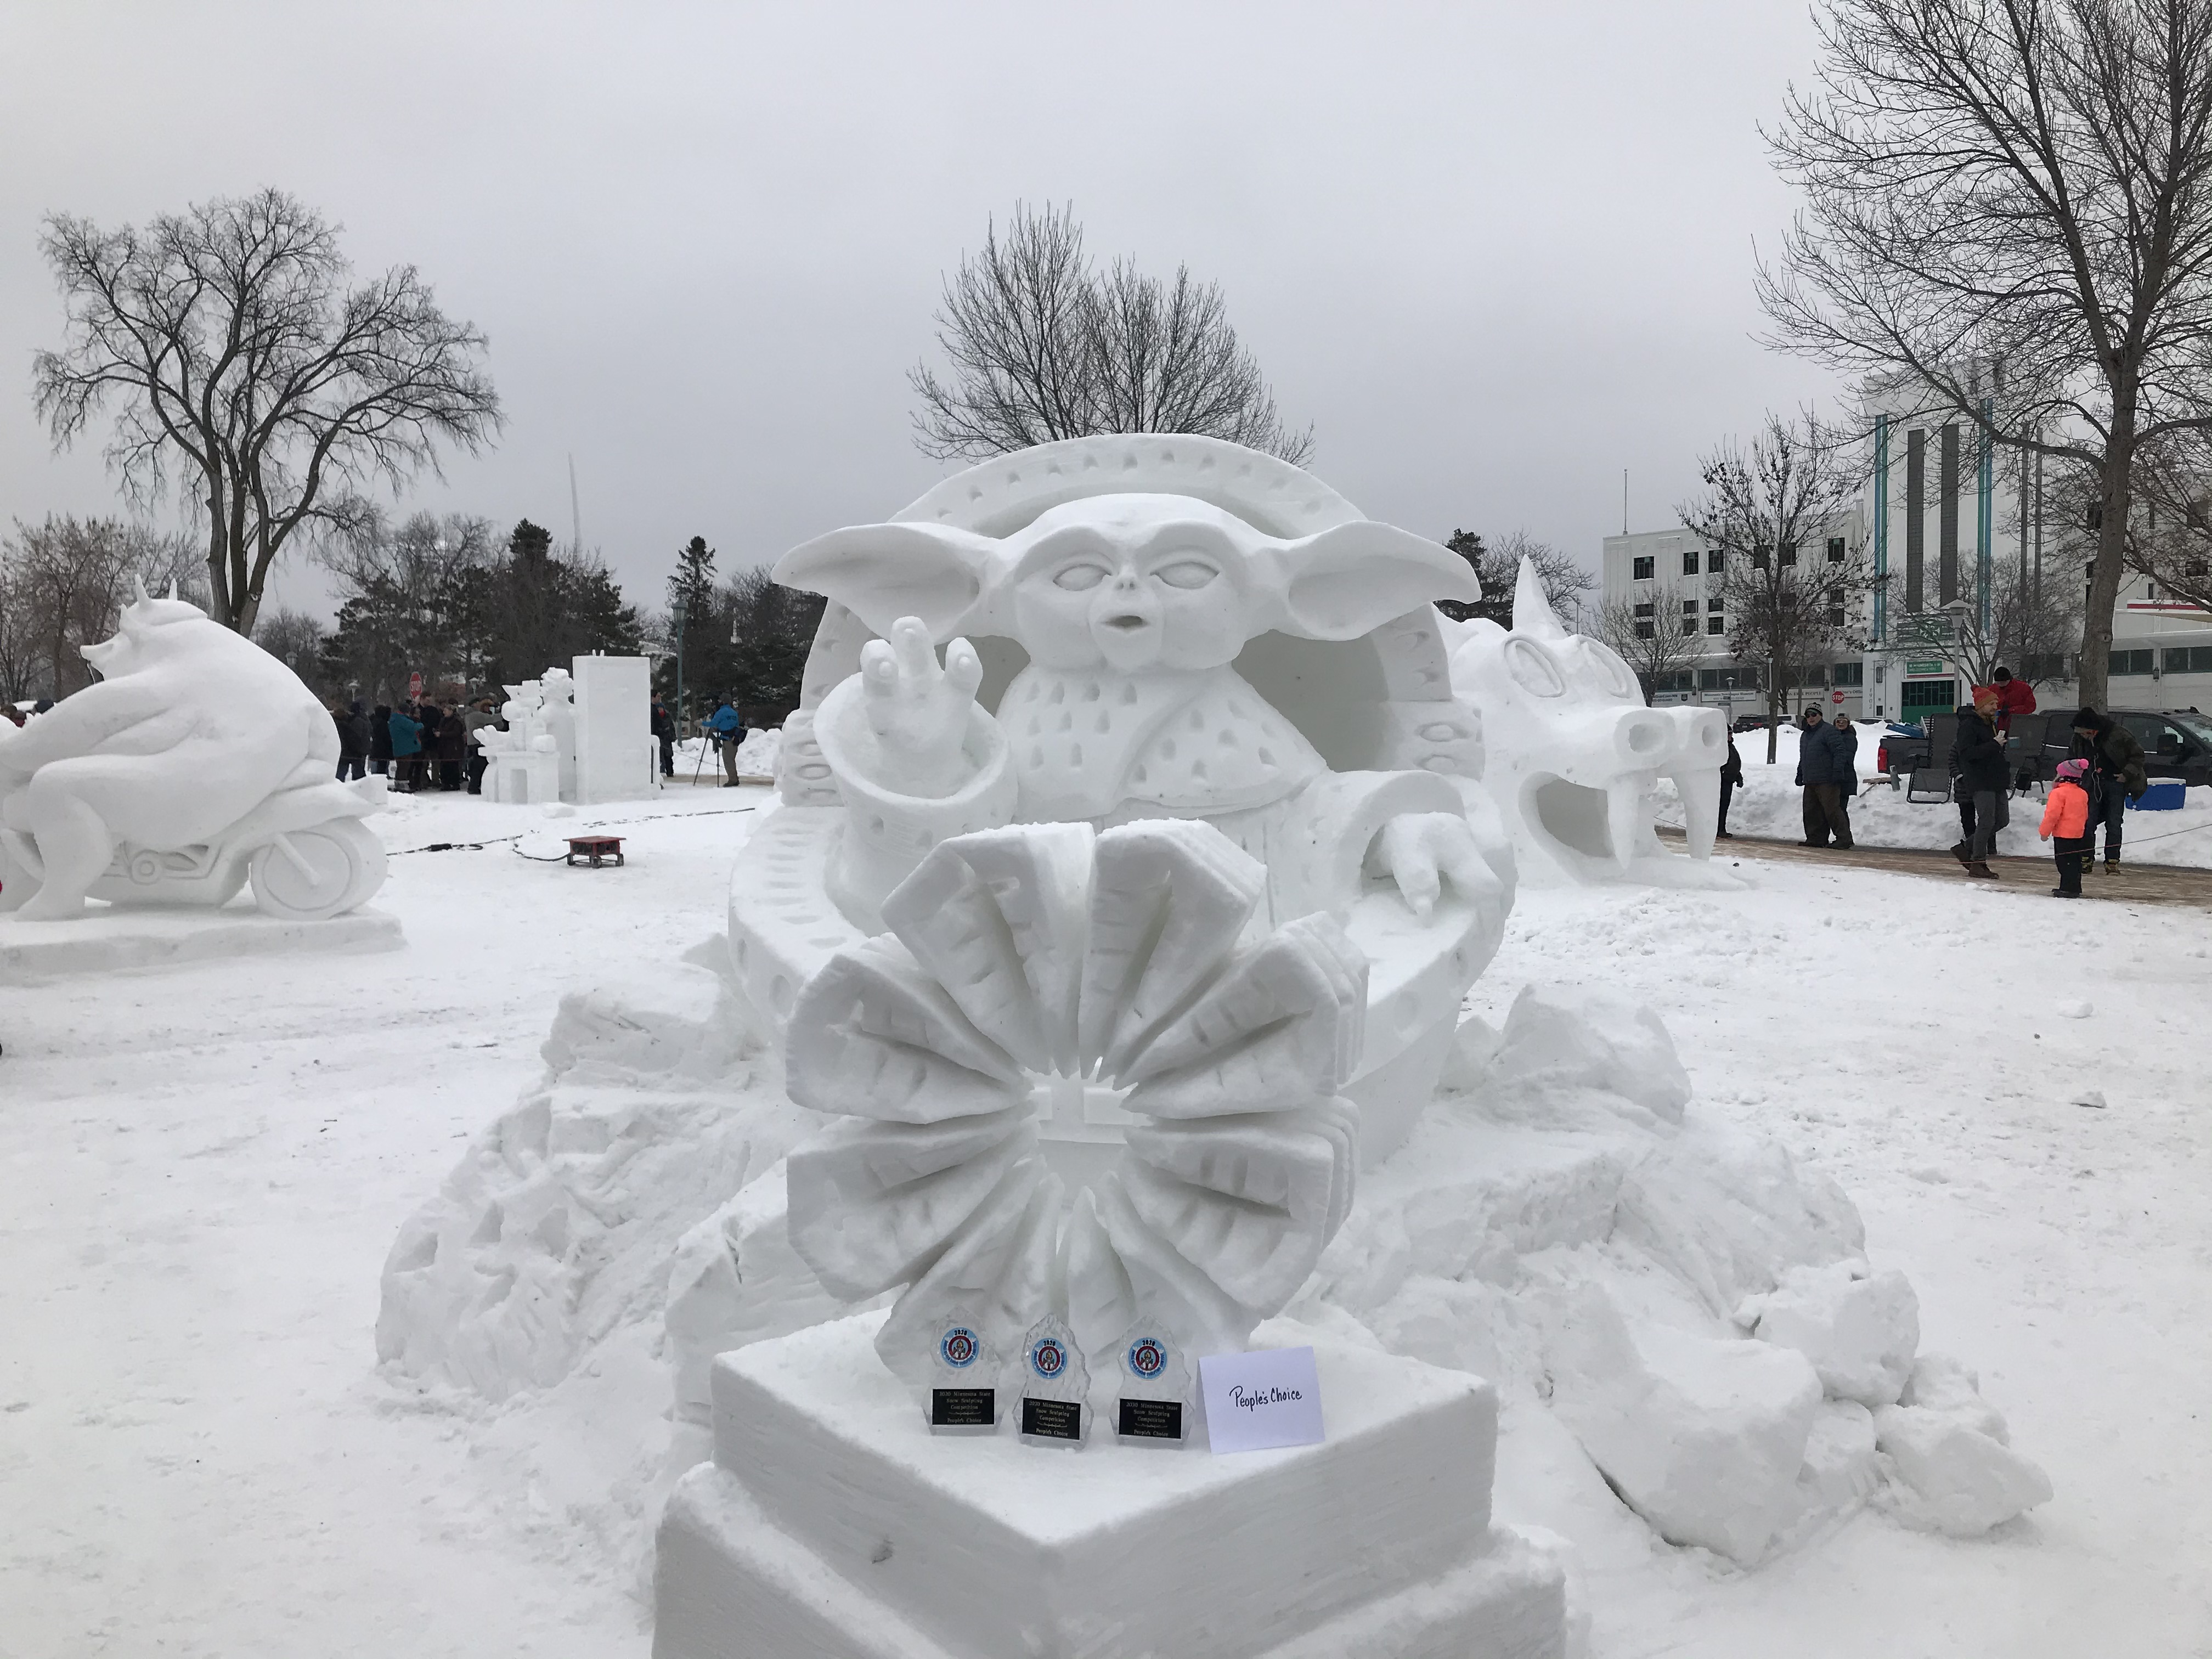 The Asset snow sculpture created by the Pig’s Eye Pirates team for the 2020 Saint Paul Winter Carnival in Saint Paul, Minn.